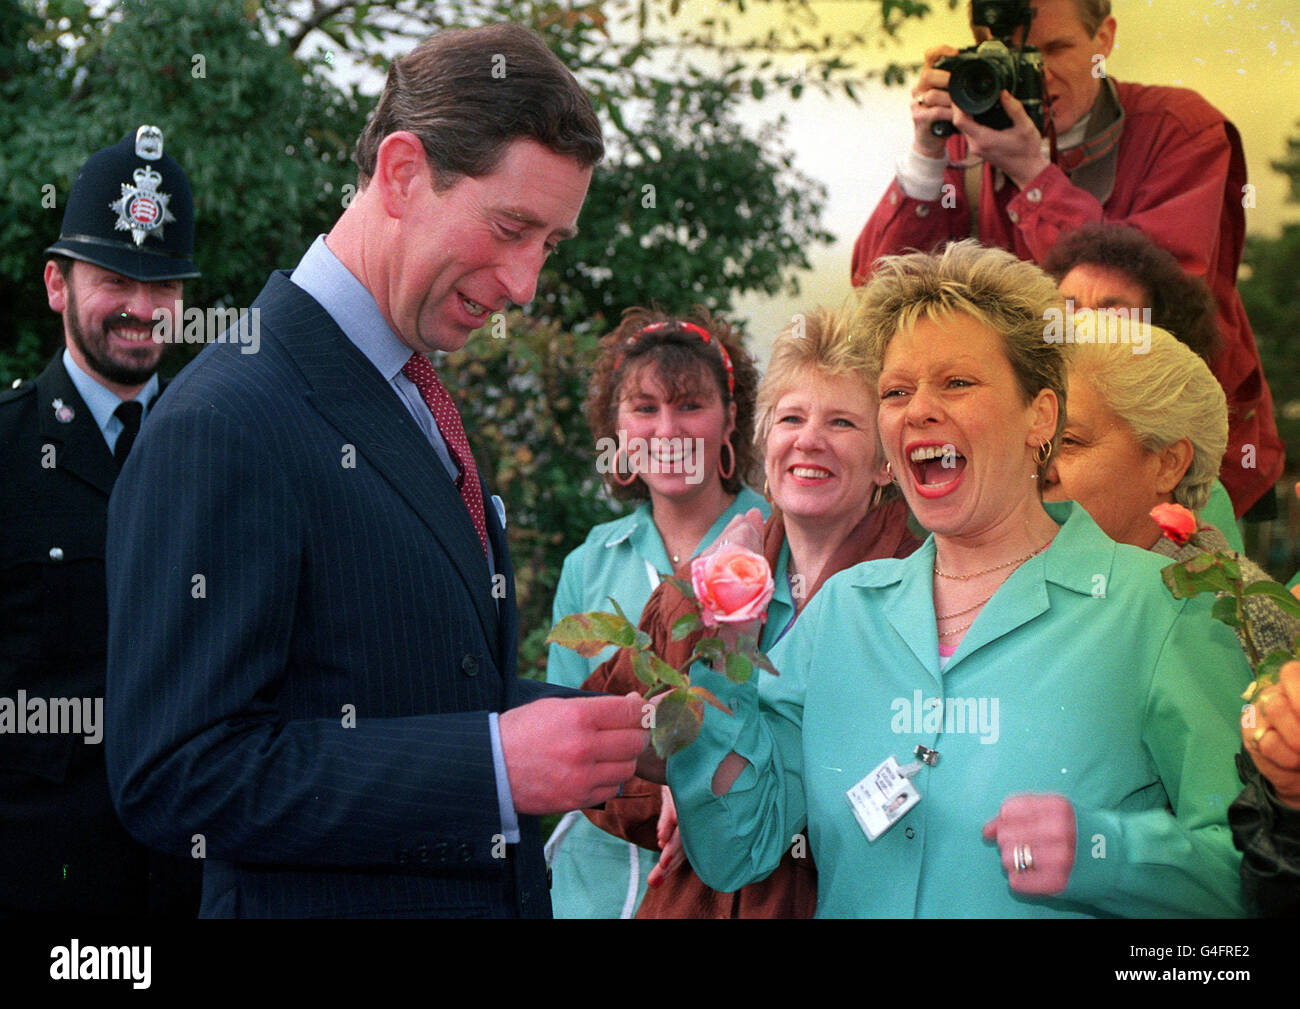 PA NEWS PHOTO 14/11/91 WARD ORDERLY LESLEY GREEN (34) FROM HARLOW, ESSEX GIVES PRINCE CHARLES A ROSE TO MARK HIS 43RD BIRTHDAY AFTER HE VISITED THE TOWN'S HOSPITAL Stock Photo